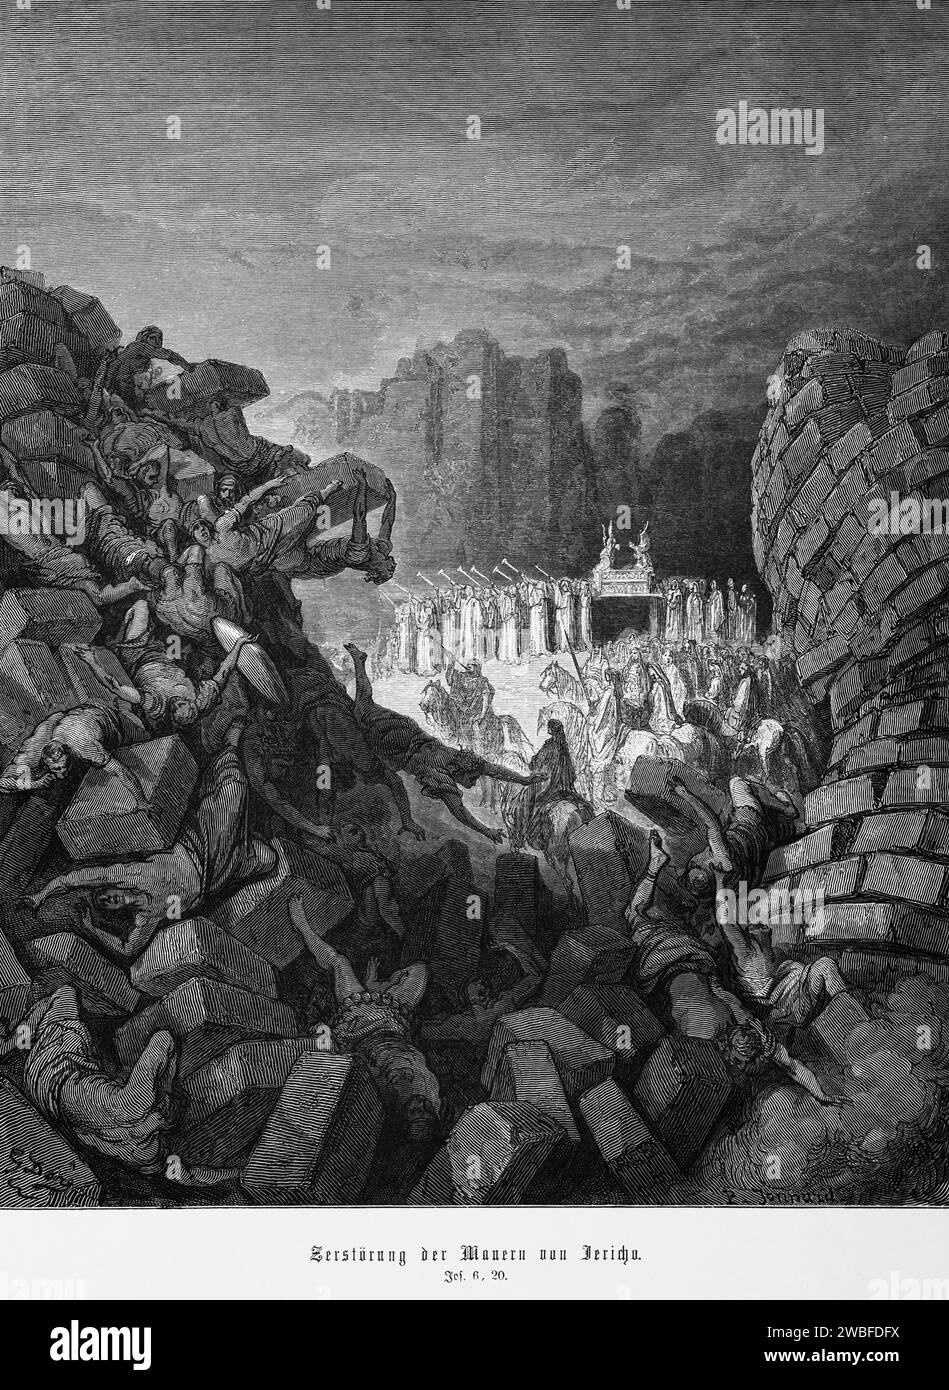 Destruction of the walls of Jericho, Book of Joshua, Chapter 6, chaos, confusion, dead, injured, wall, boulders, music, wind instruments, trumpets Stock Photo